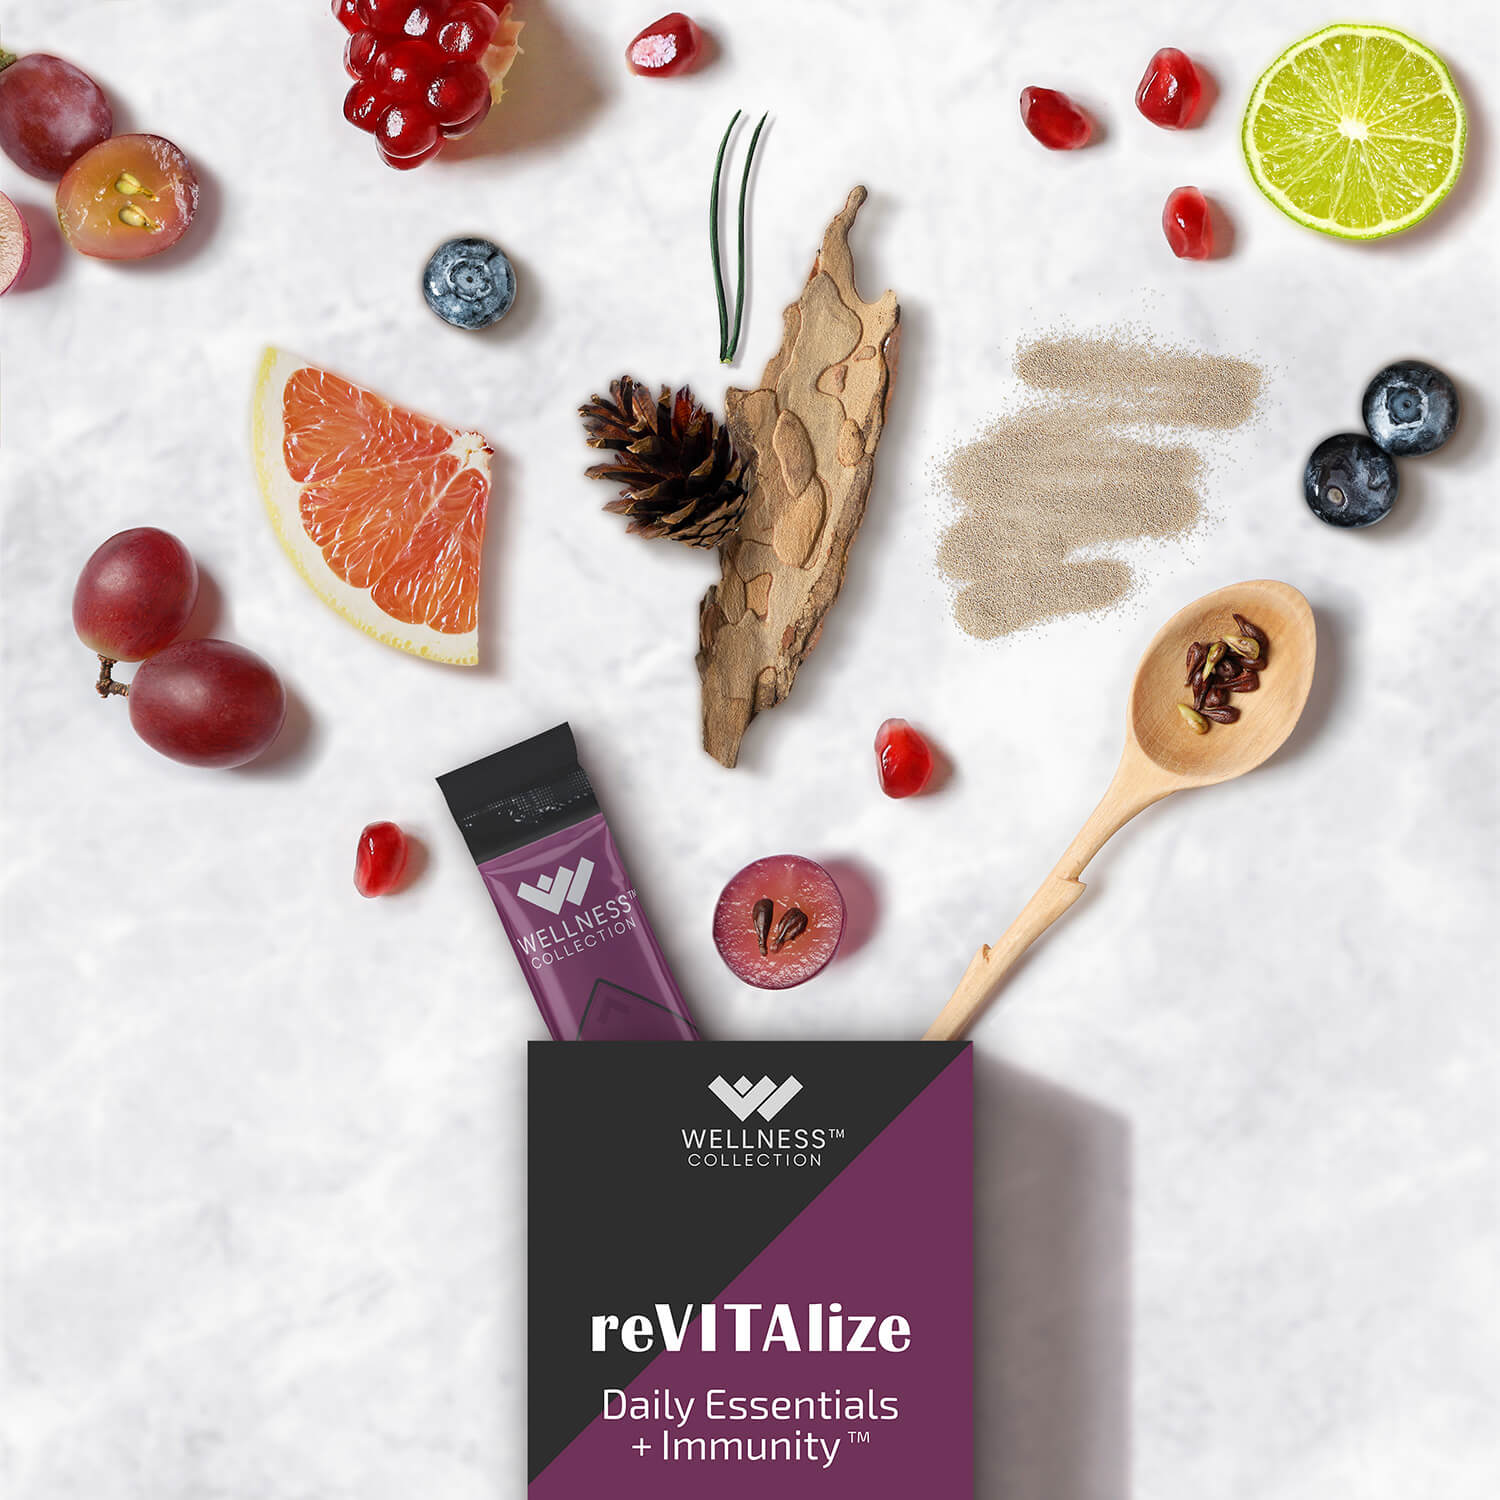 Image showcasing ingredients of the reVITAlize daily essentials plus immunity